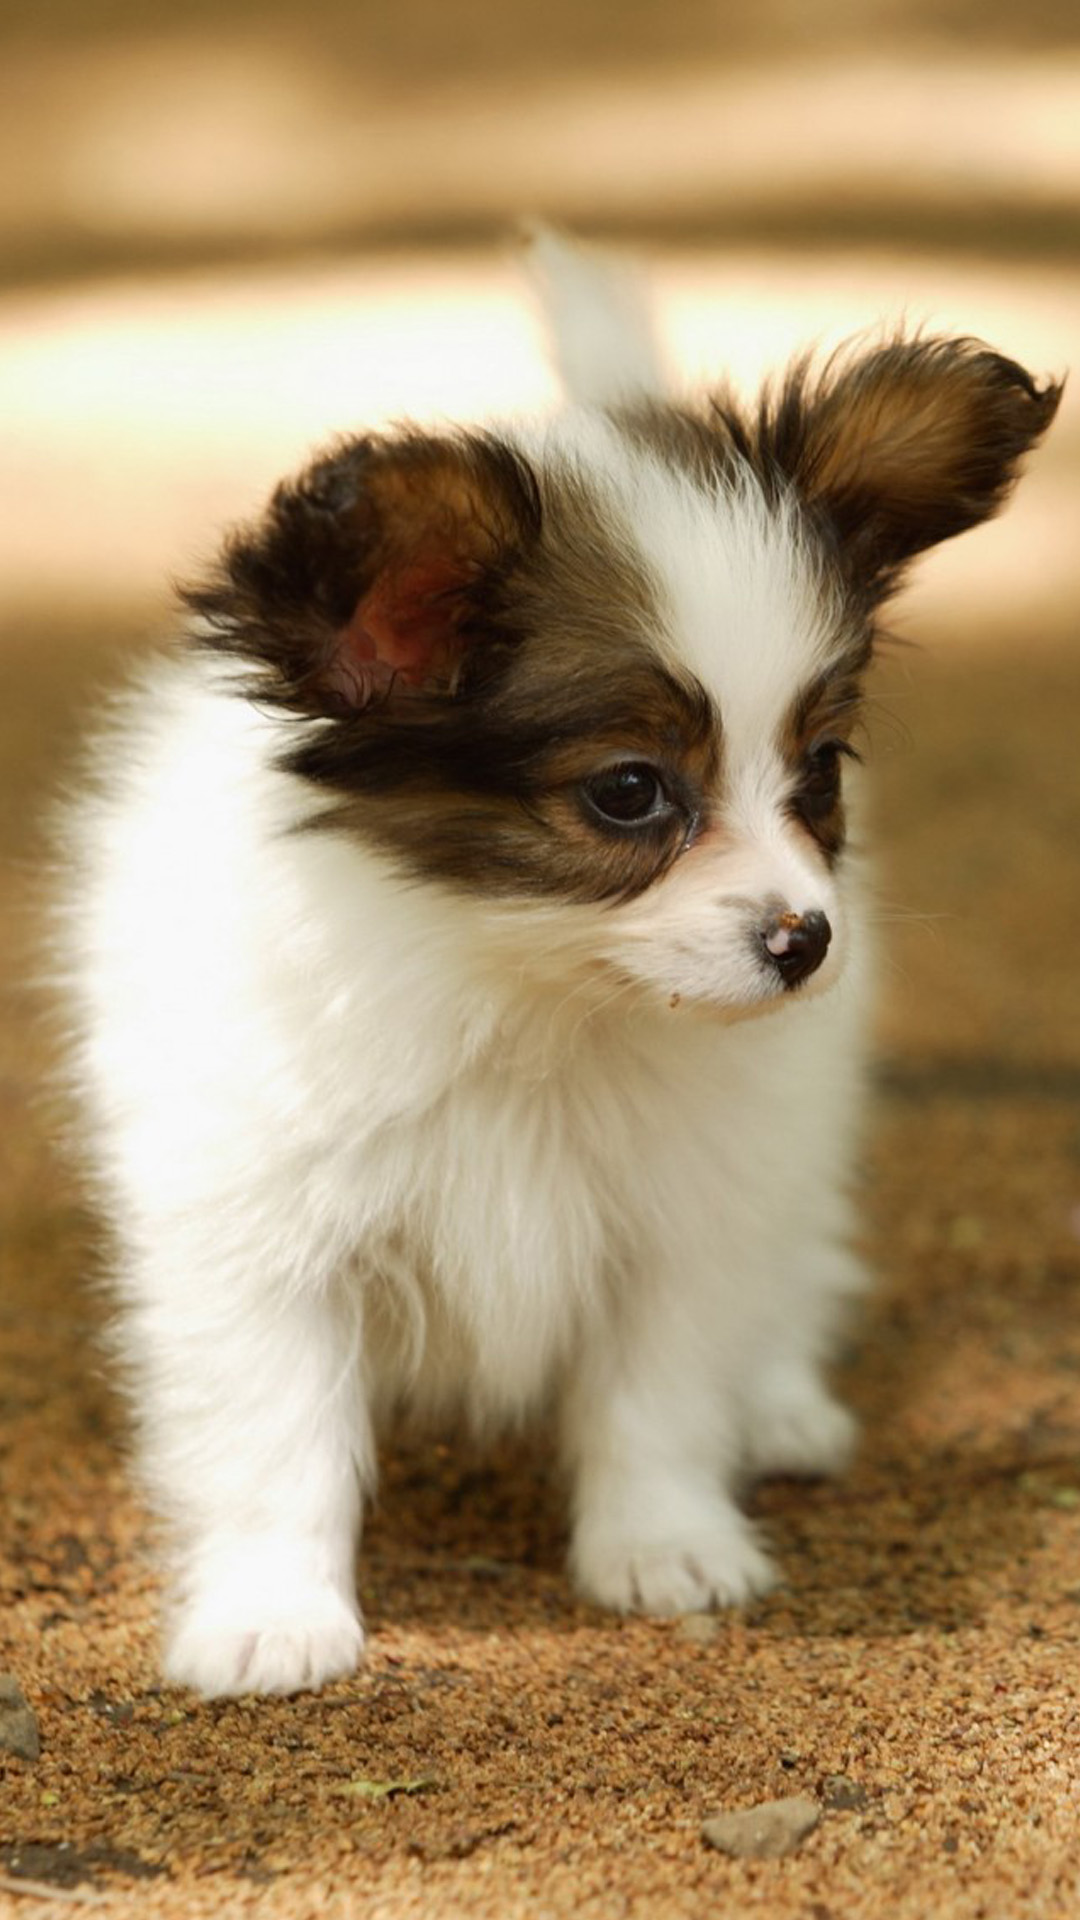 Cute Lovely Puppy Walking Dog Animal Iphone 6 Wallpaper - Iphone Animal Wallpapers Hd - HD Wallpaper 